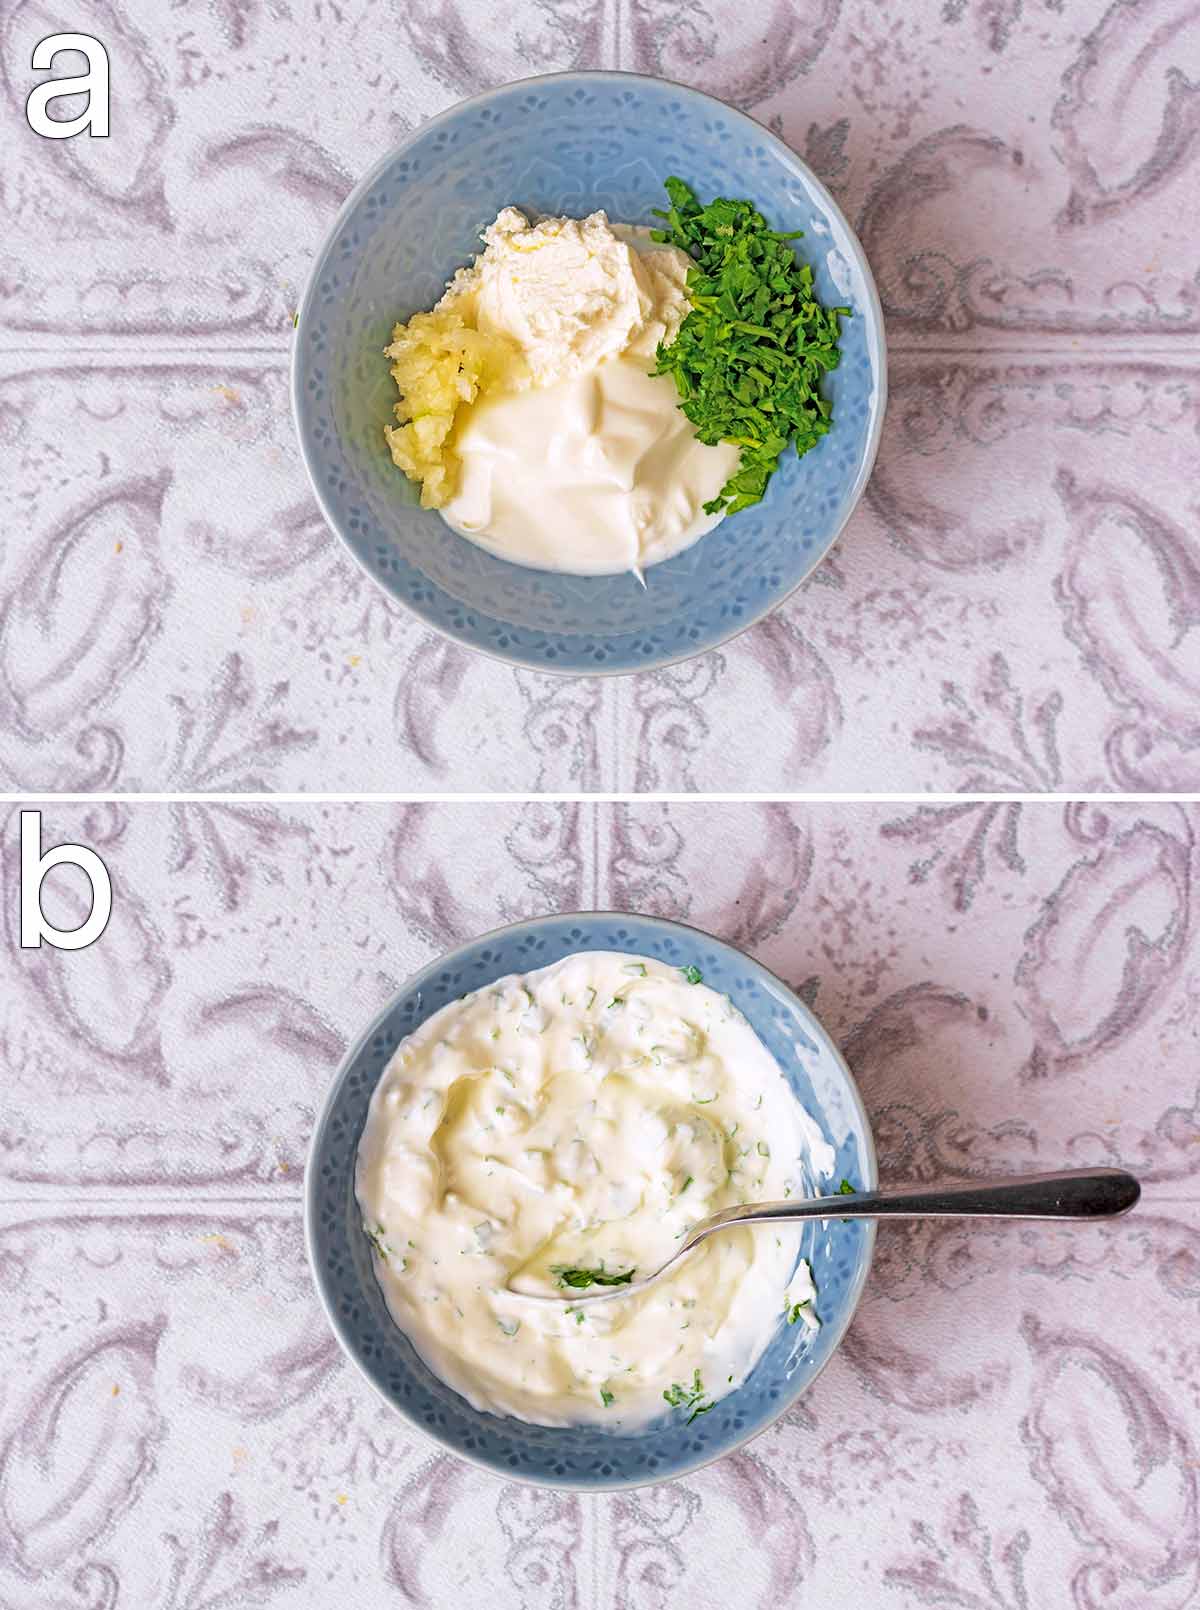 Two shot collage of a bowl of cream cheese, yogurt and herbs, before and after mixing.